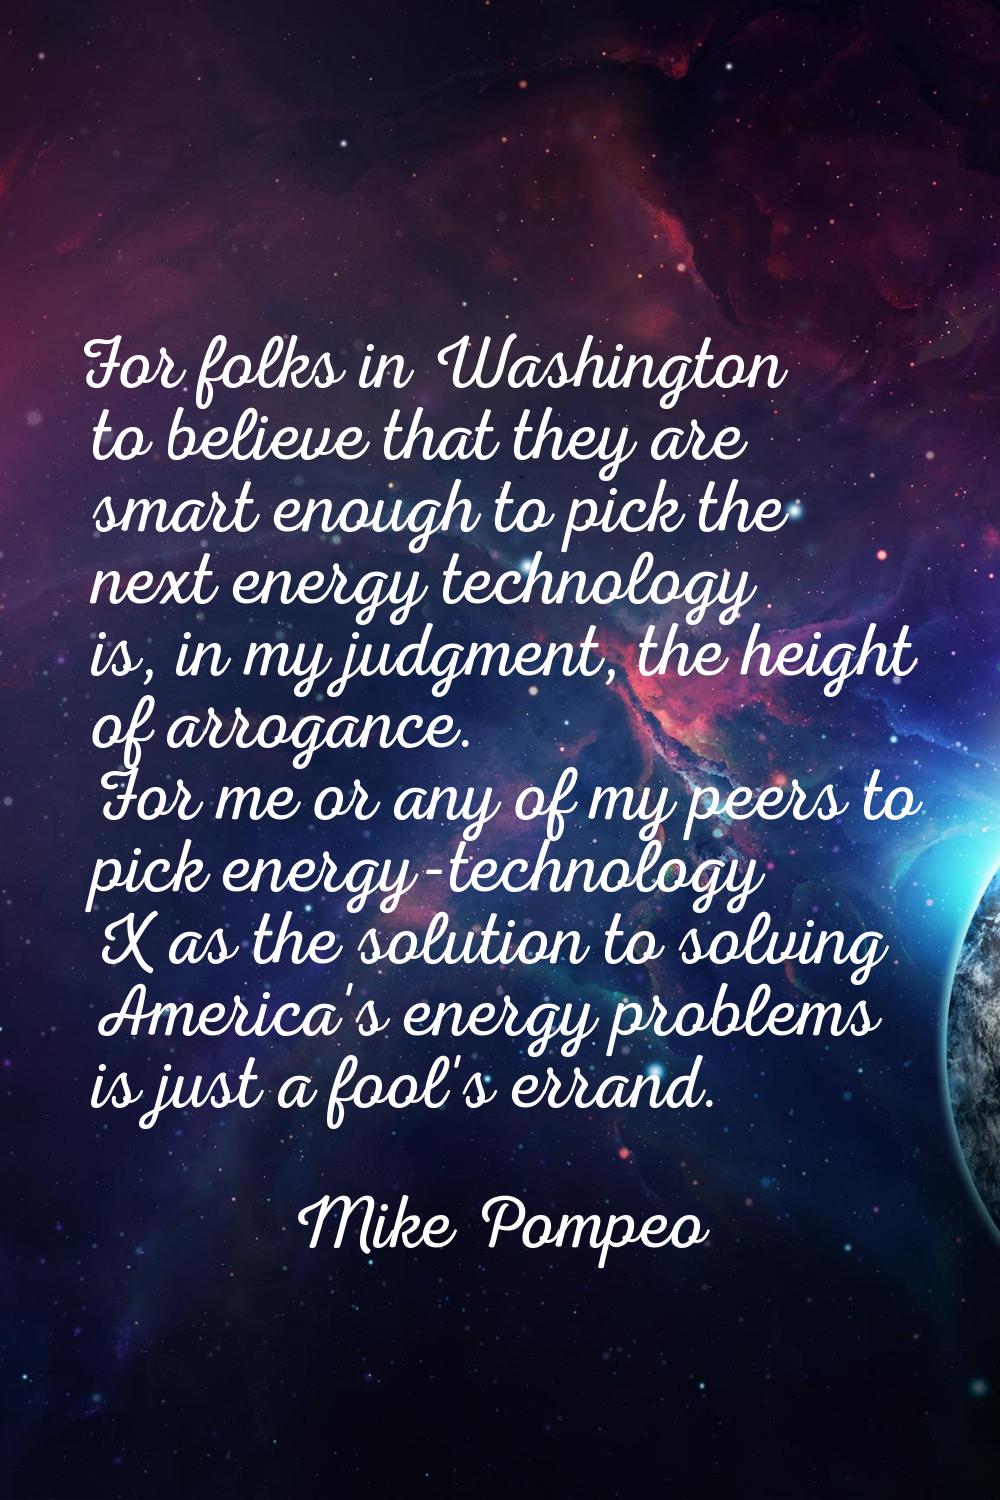 For folks in Washington to believe that they are smart enough to pick the next energy technology is